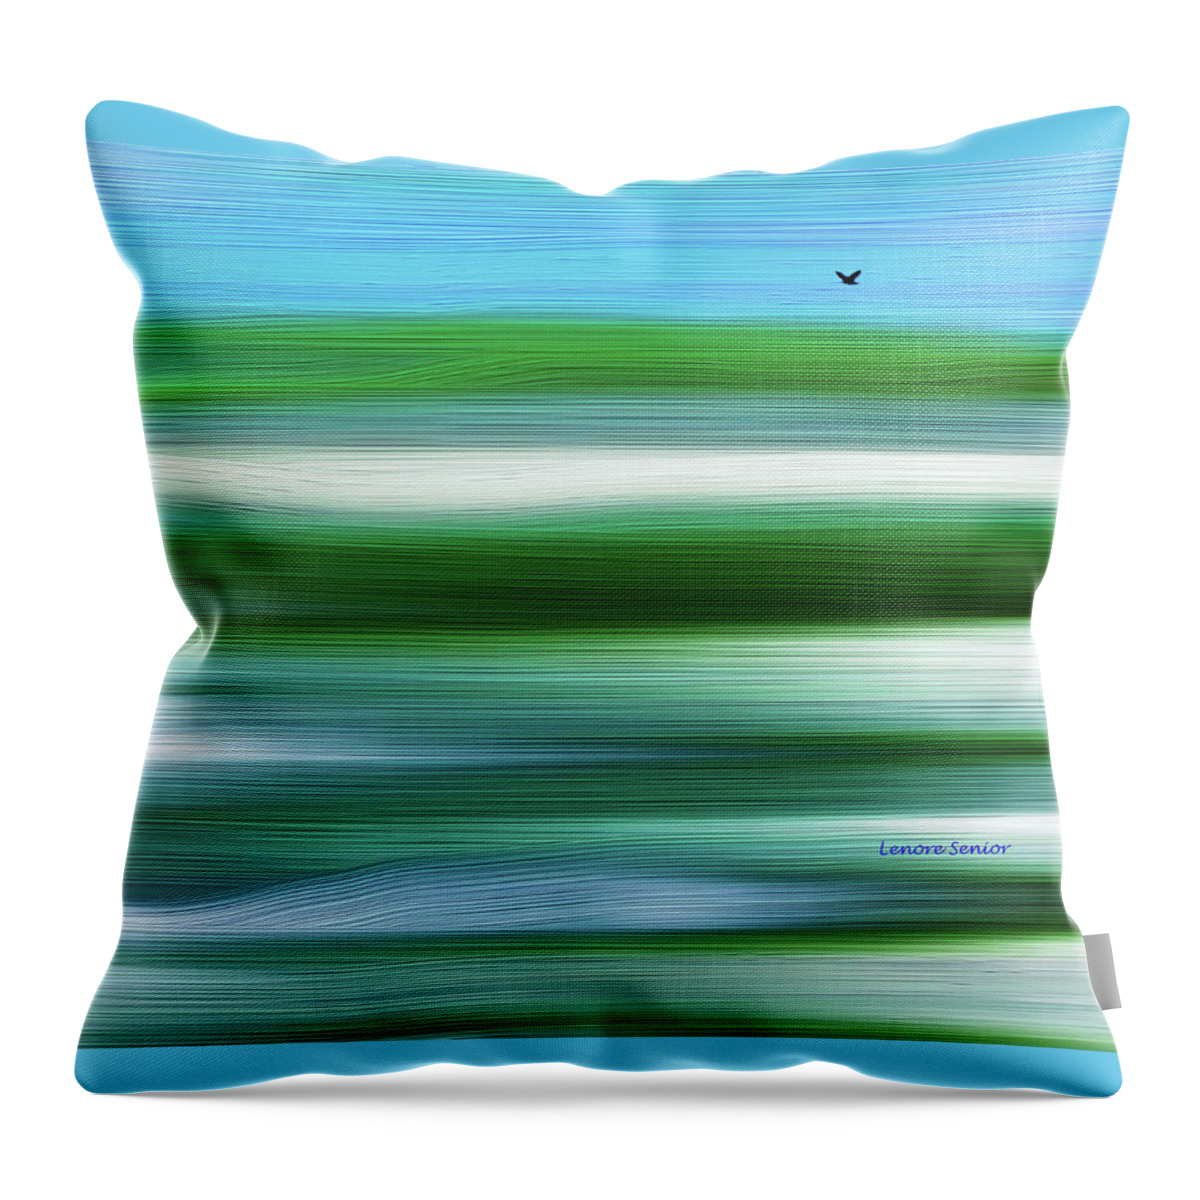 Abstract Throw Pillow featuring the painting Lone Crow by Lenore Senior